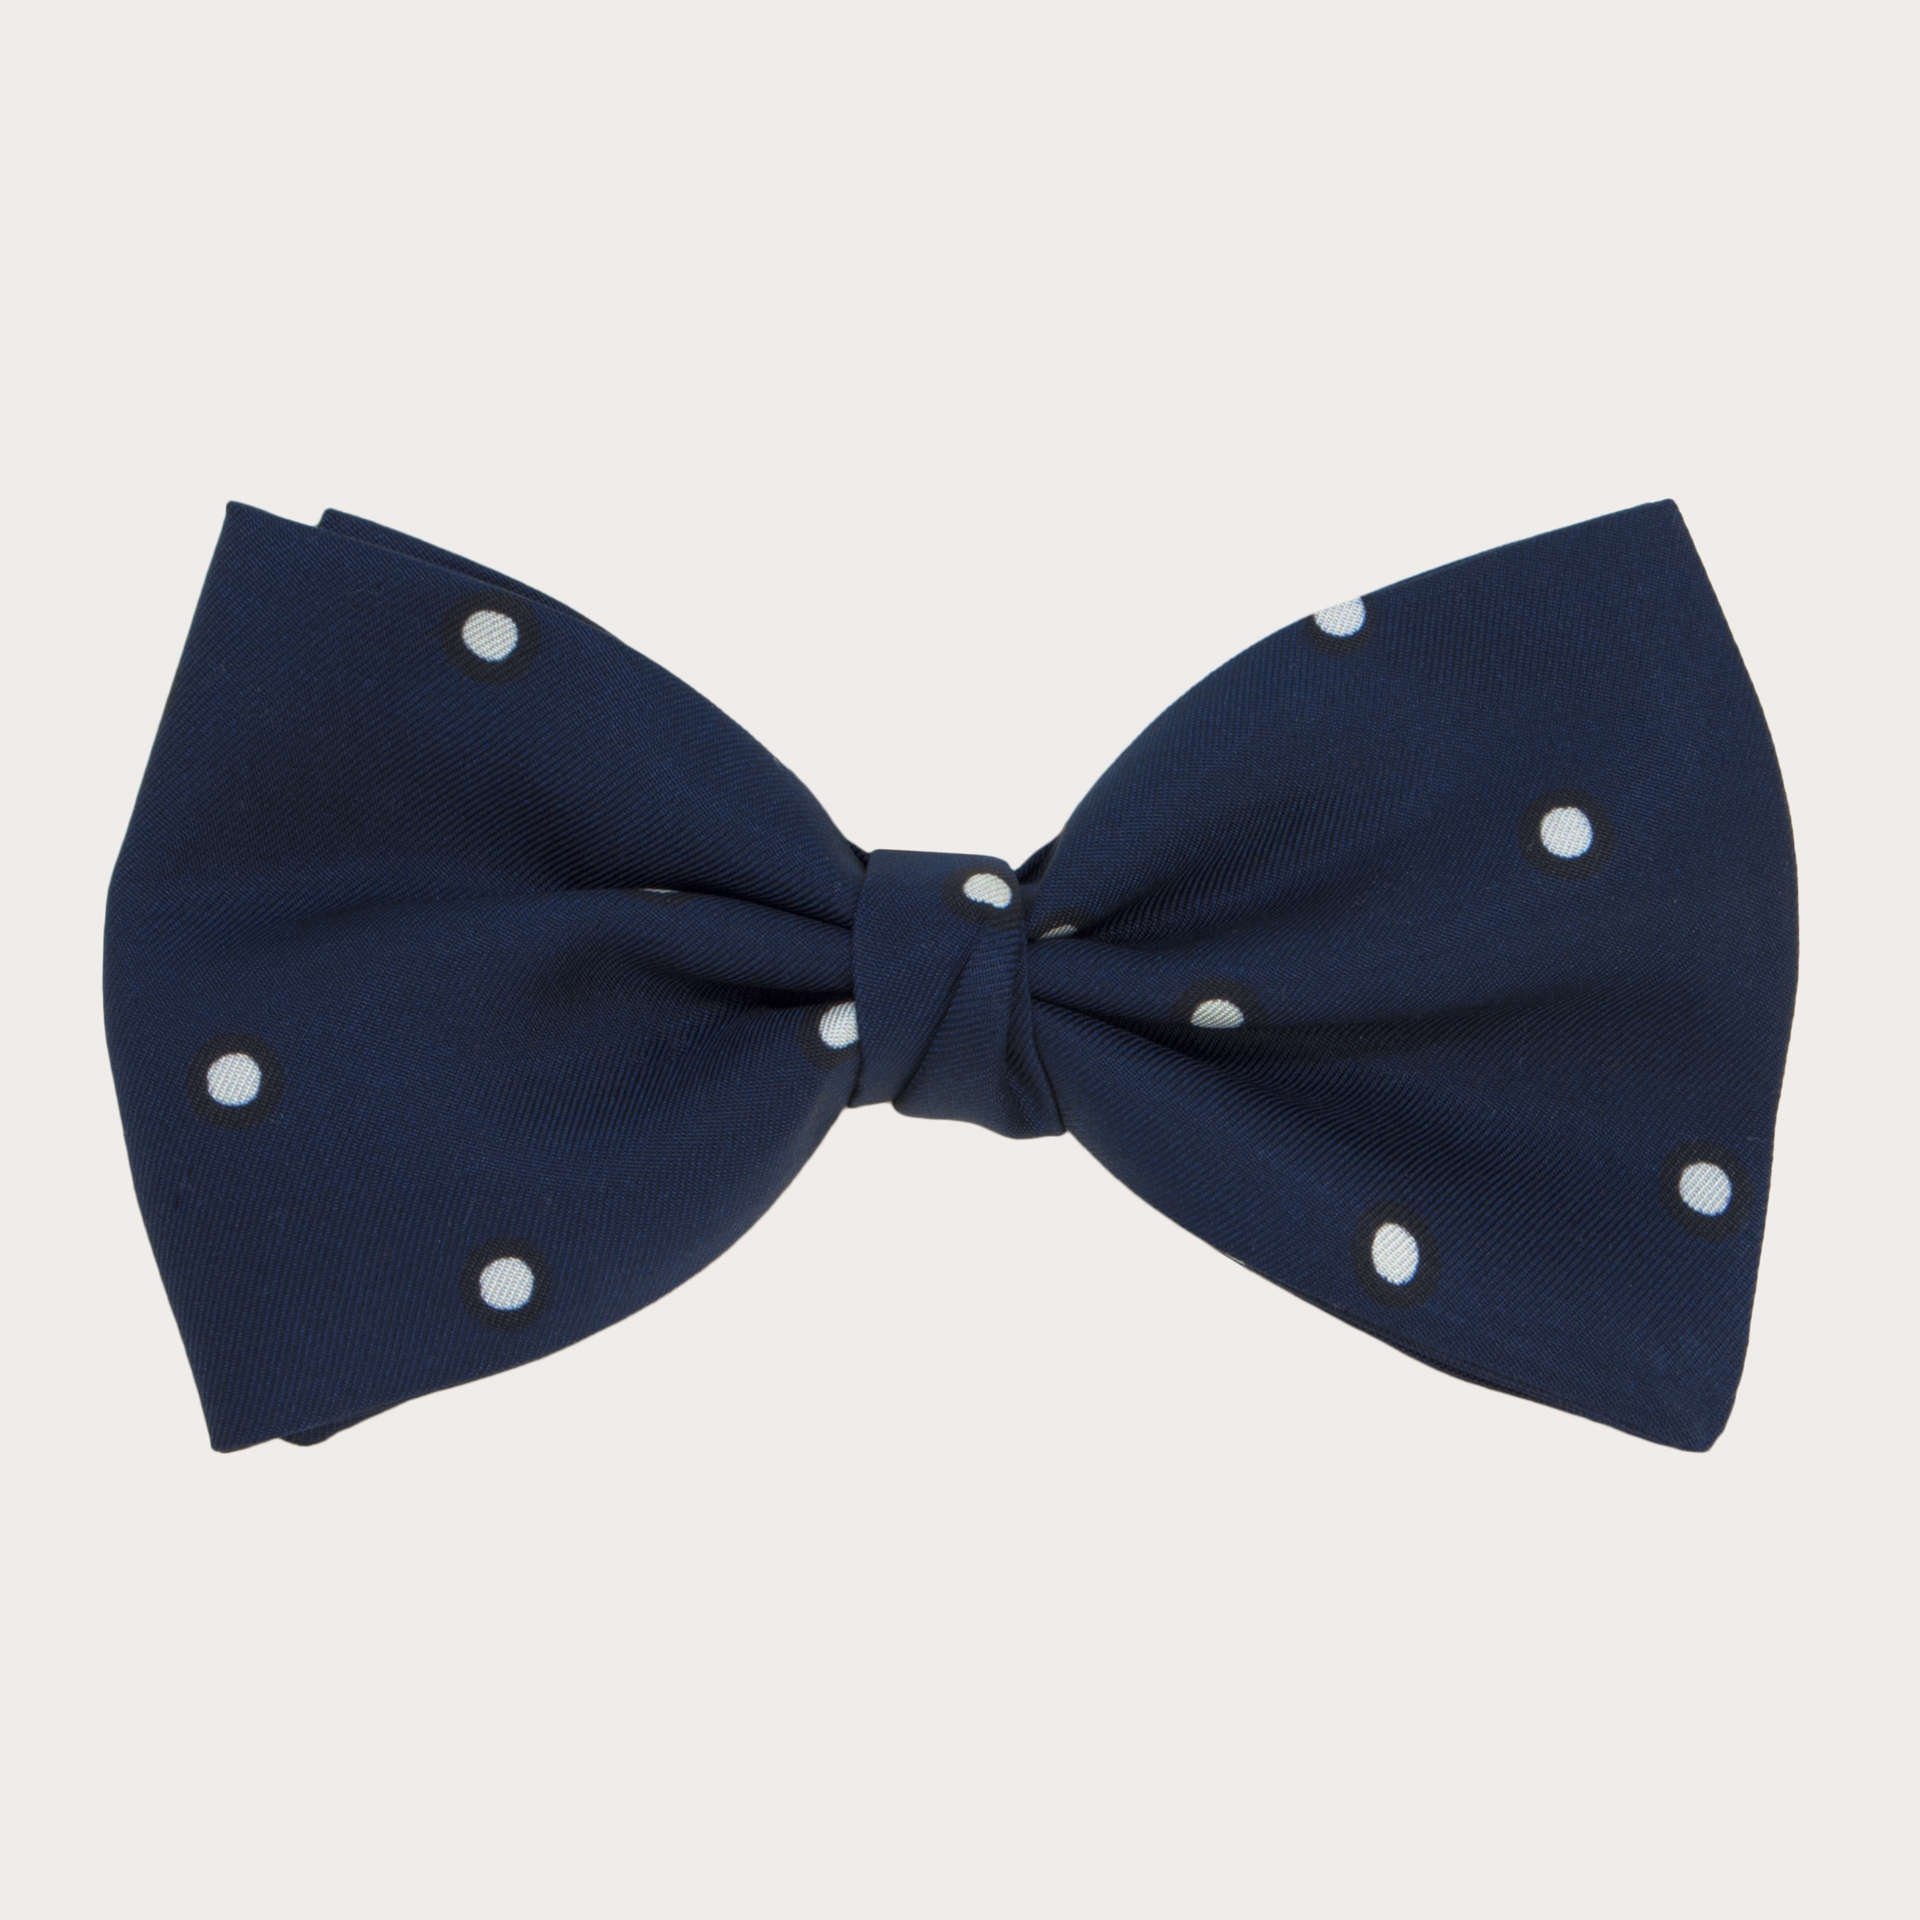 BRUCLE Men's silk bow tie, blue with white polka dot pattern